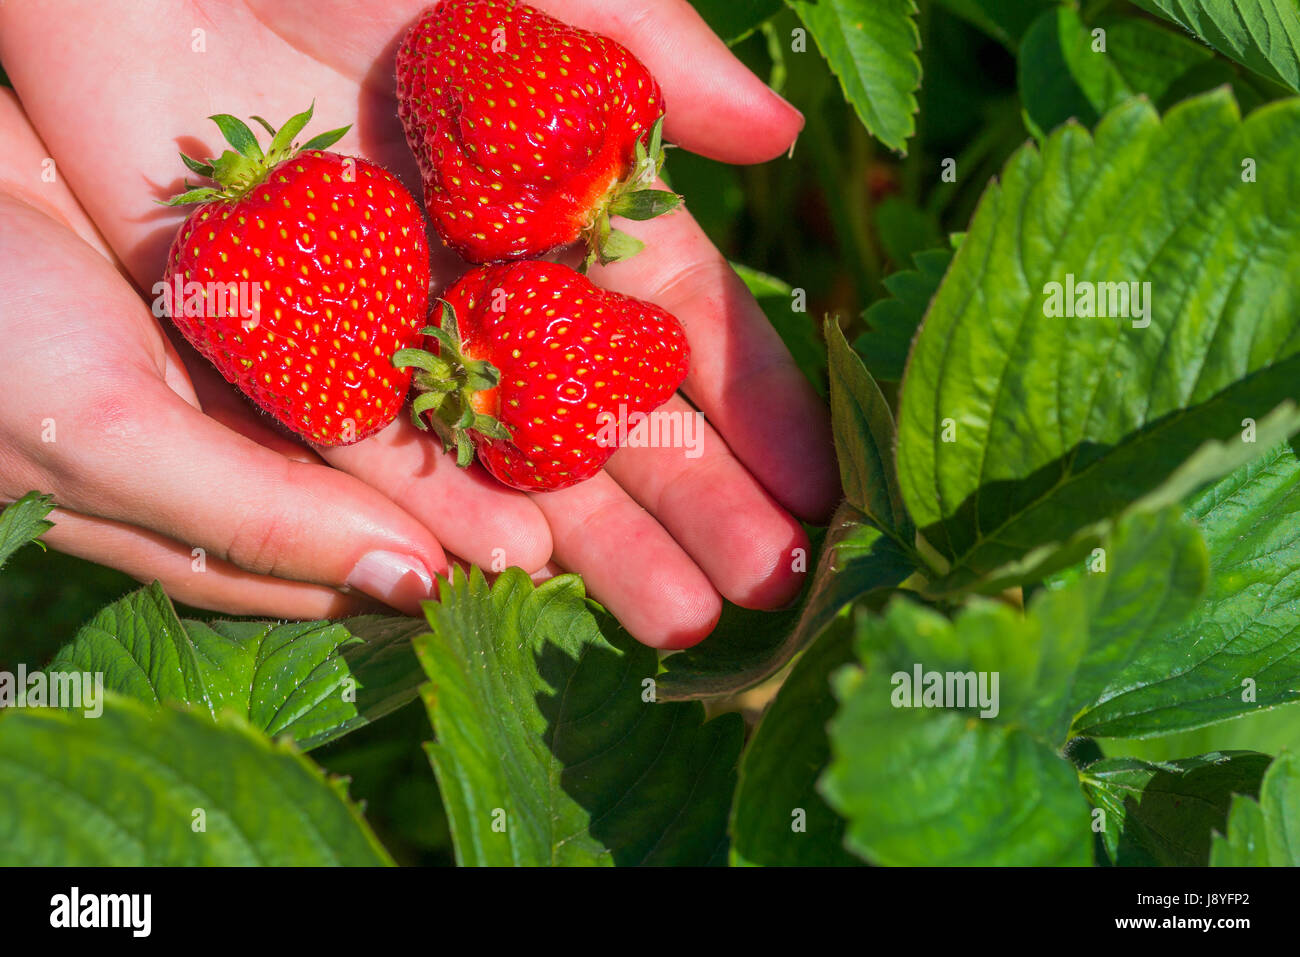 Three fresh picked delicious strawberries held over strawberry plants Stock Photo